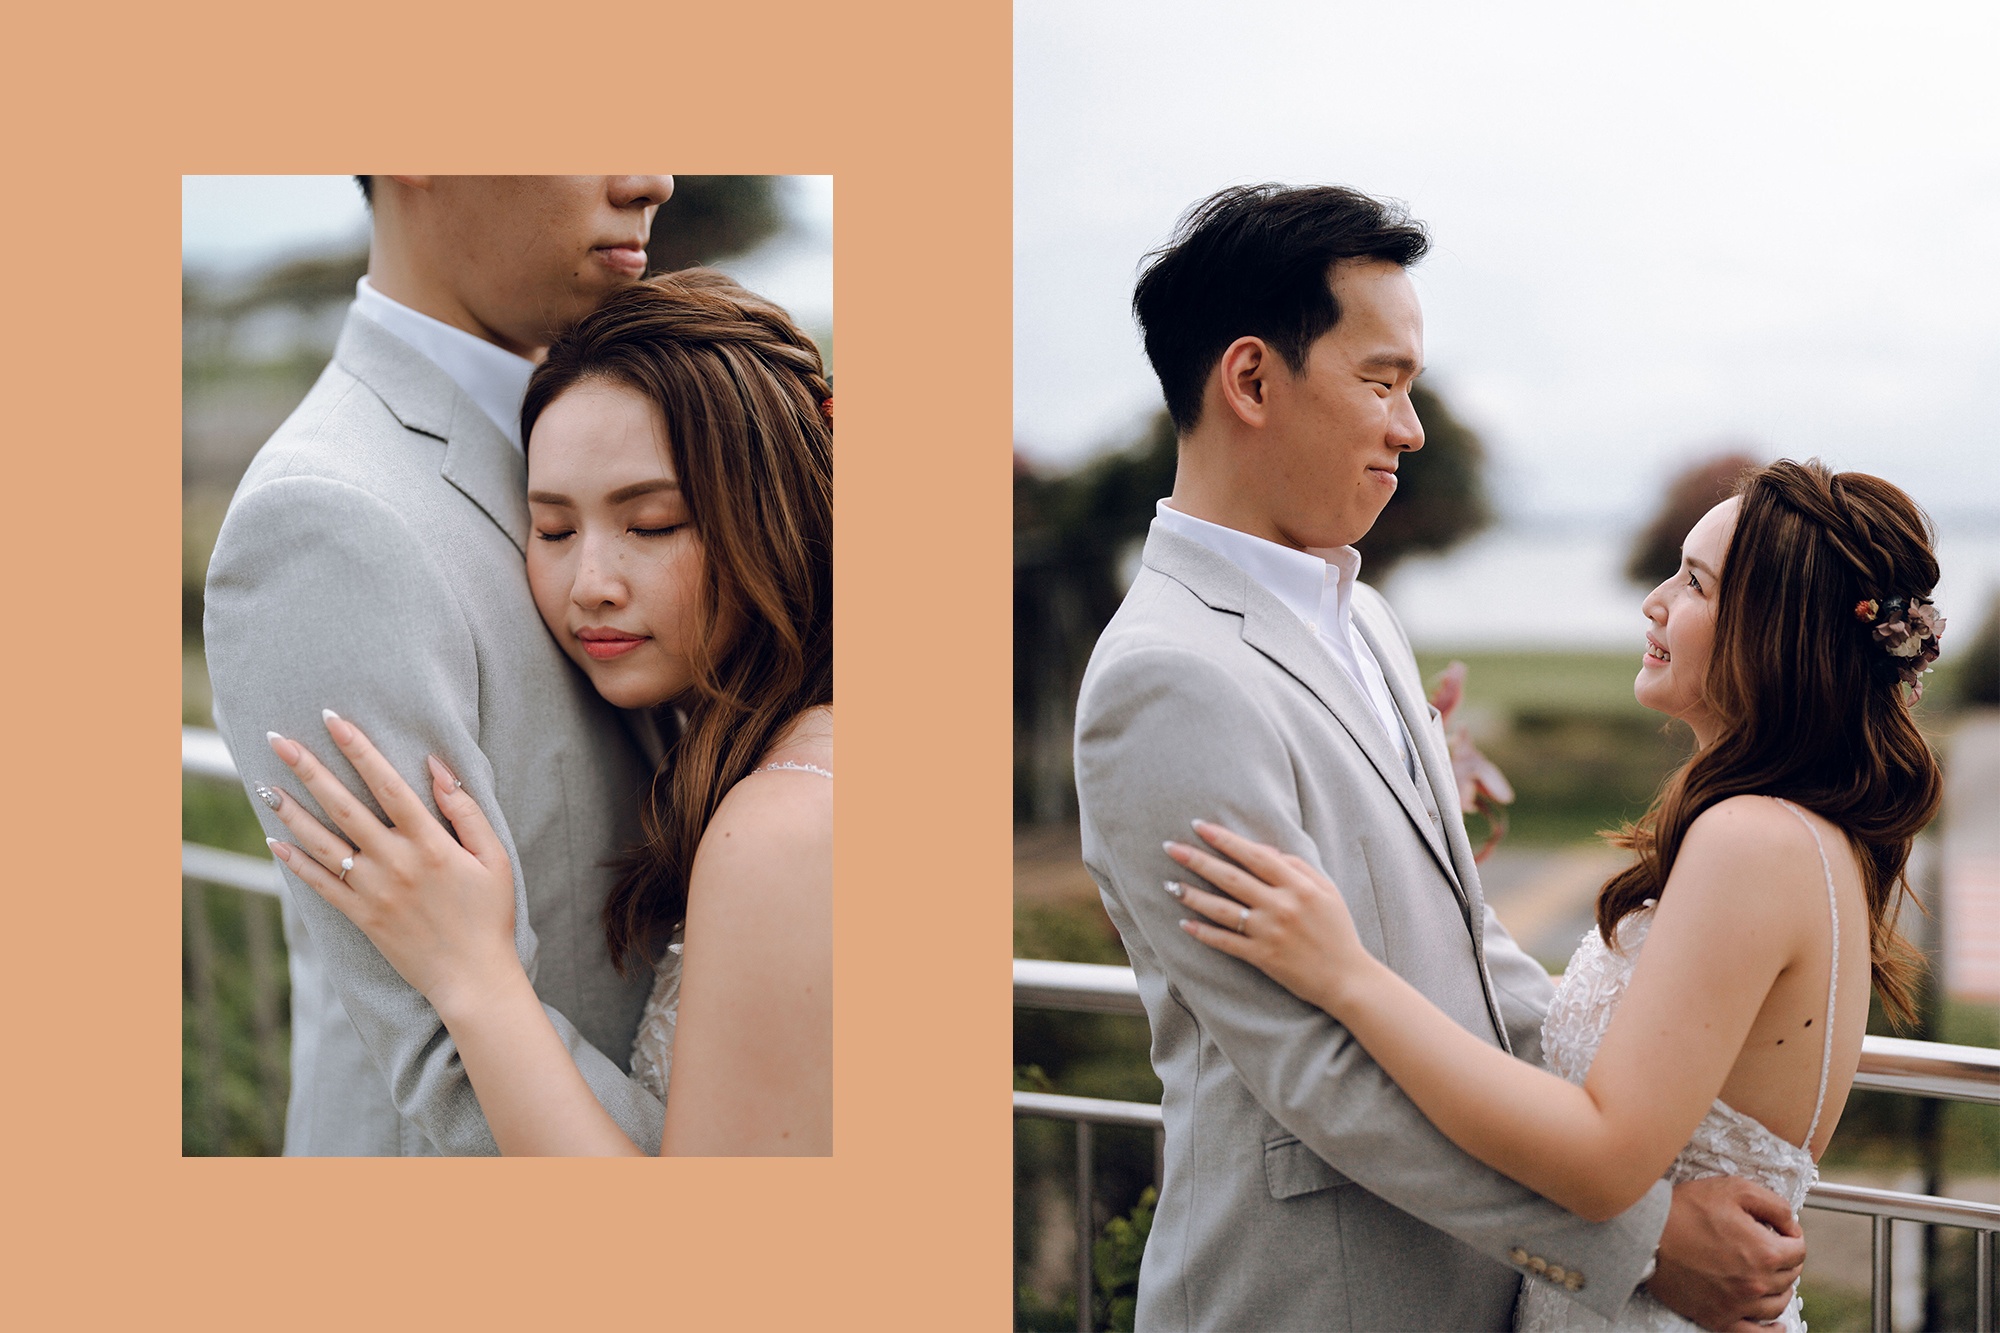 Prewedding Photoshoot At East Coast Park And Industrial Rooftop by Michael on OneThreeOneFour 6